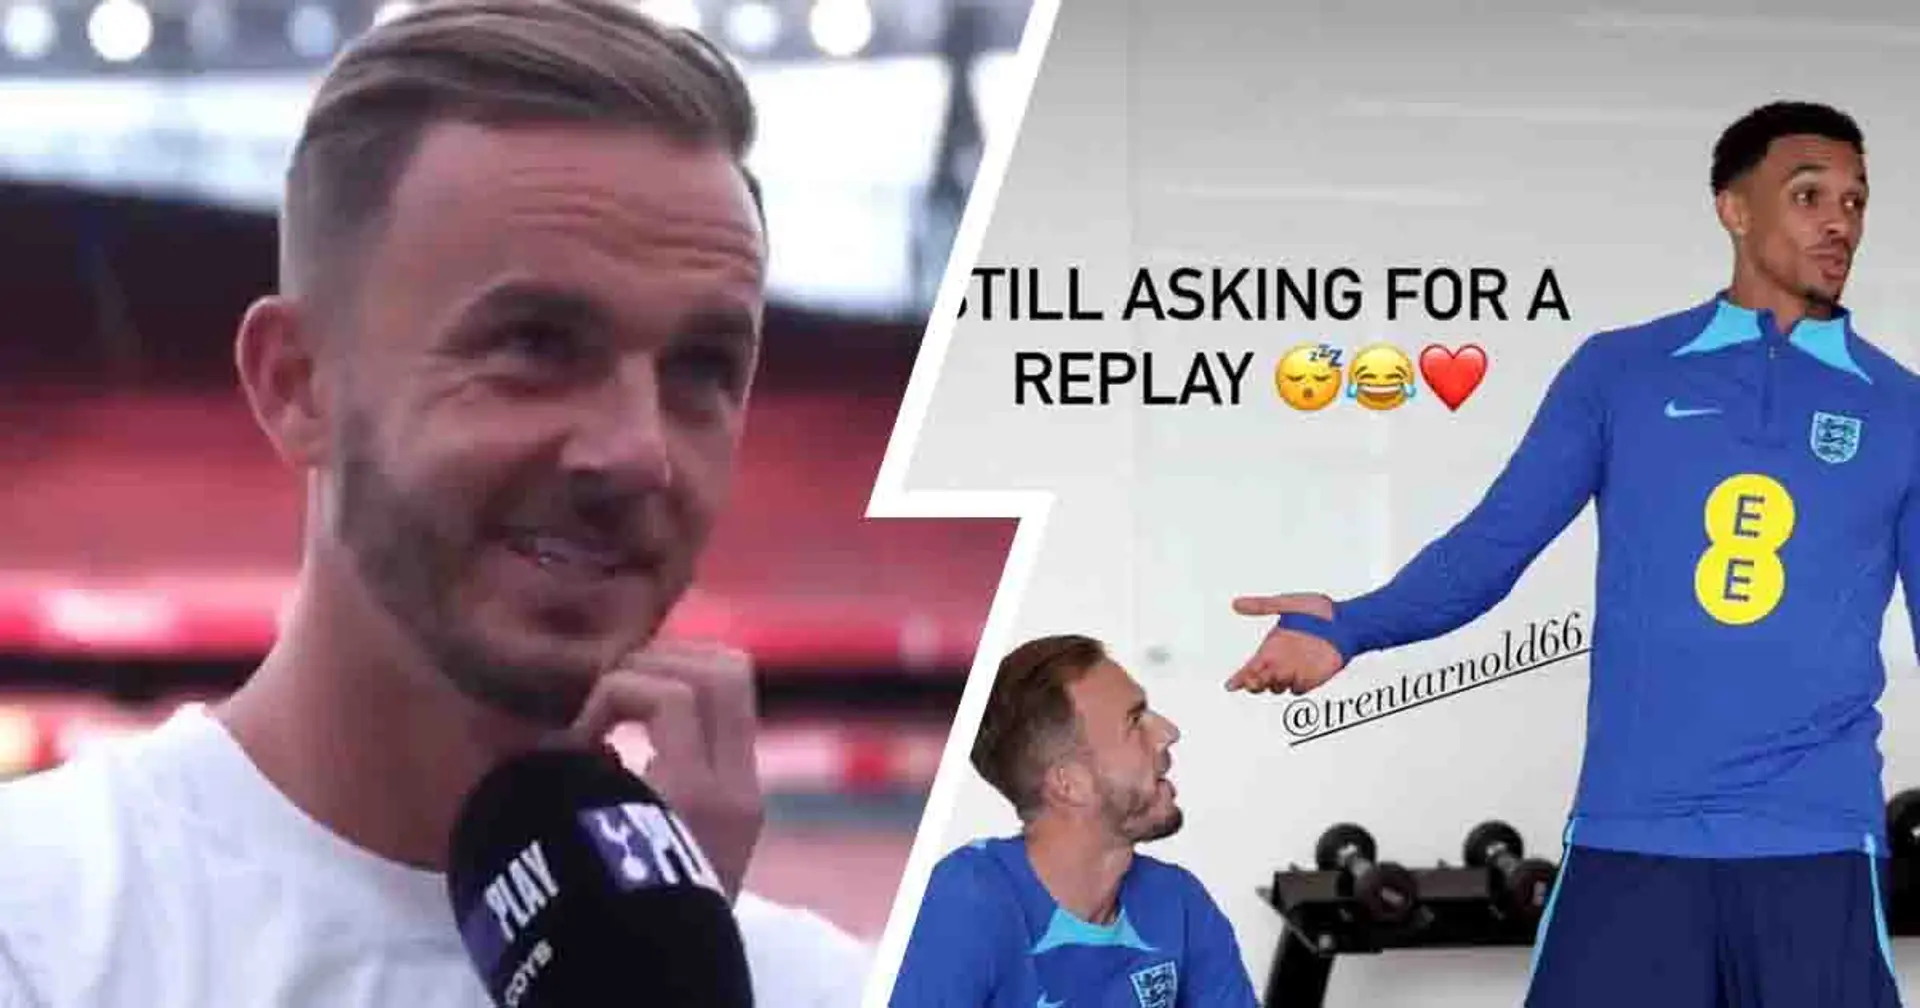 'Trent is a good friend': Maddison opens up on mocking Alexander-Arnold with replay joke